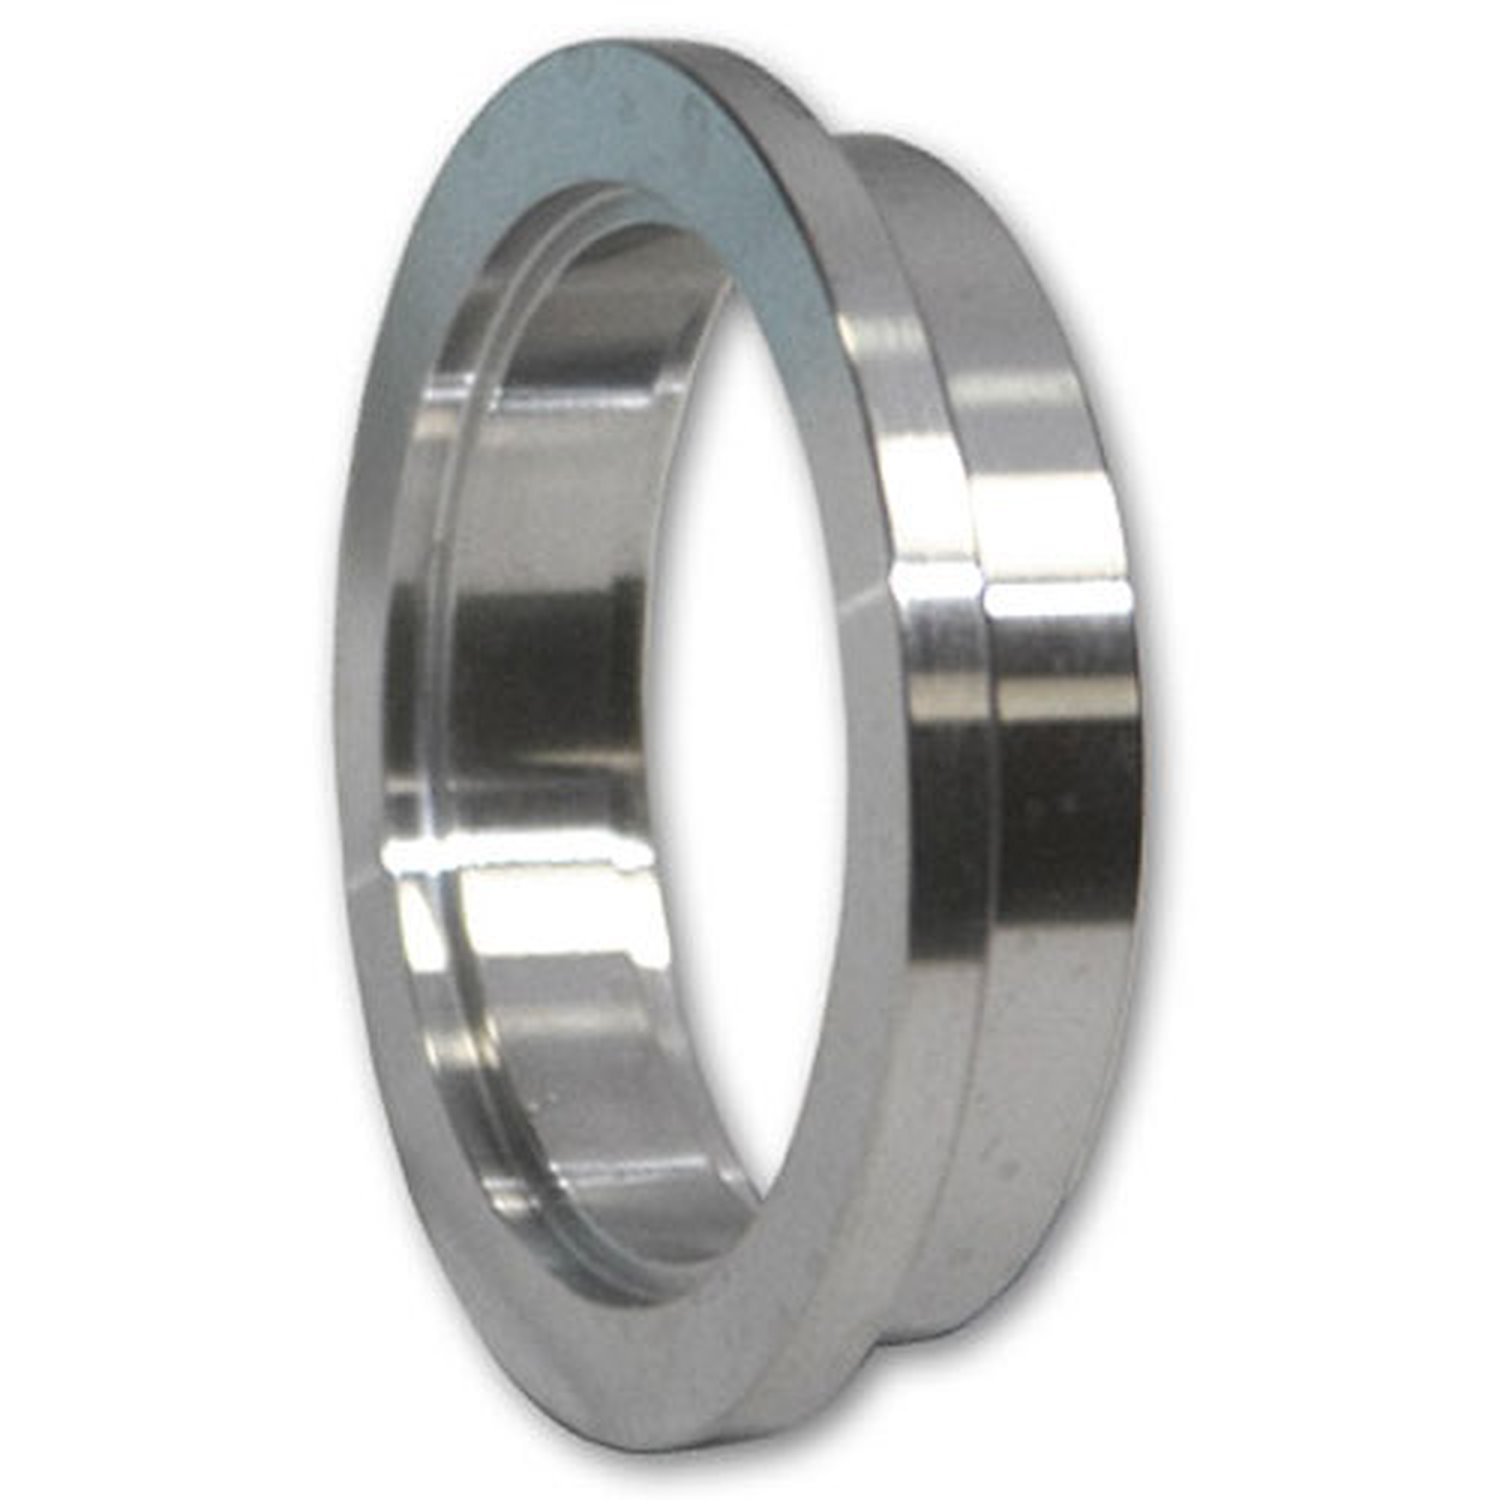 Adapter Flange For Tial 38mm Minigate (Inlet)